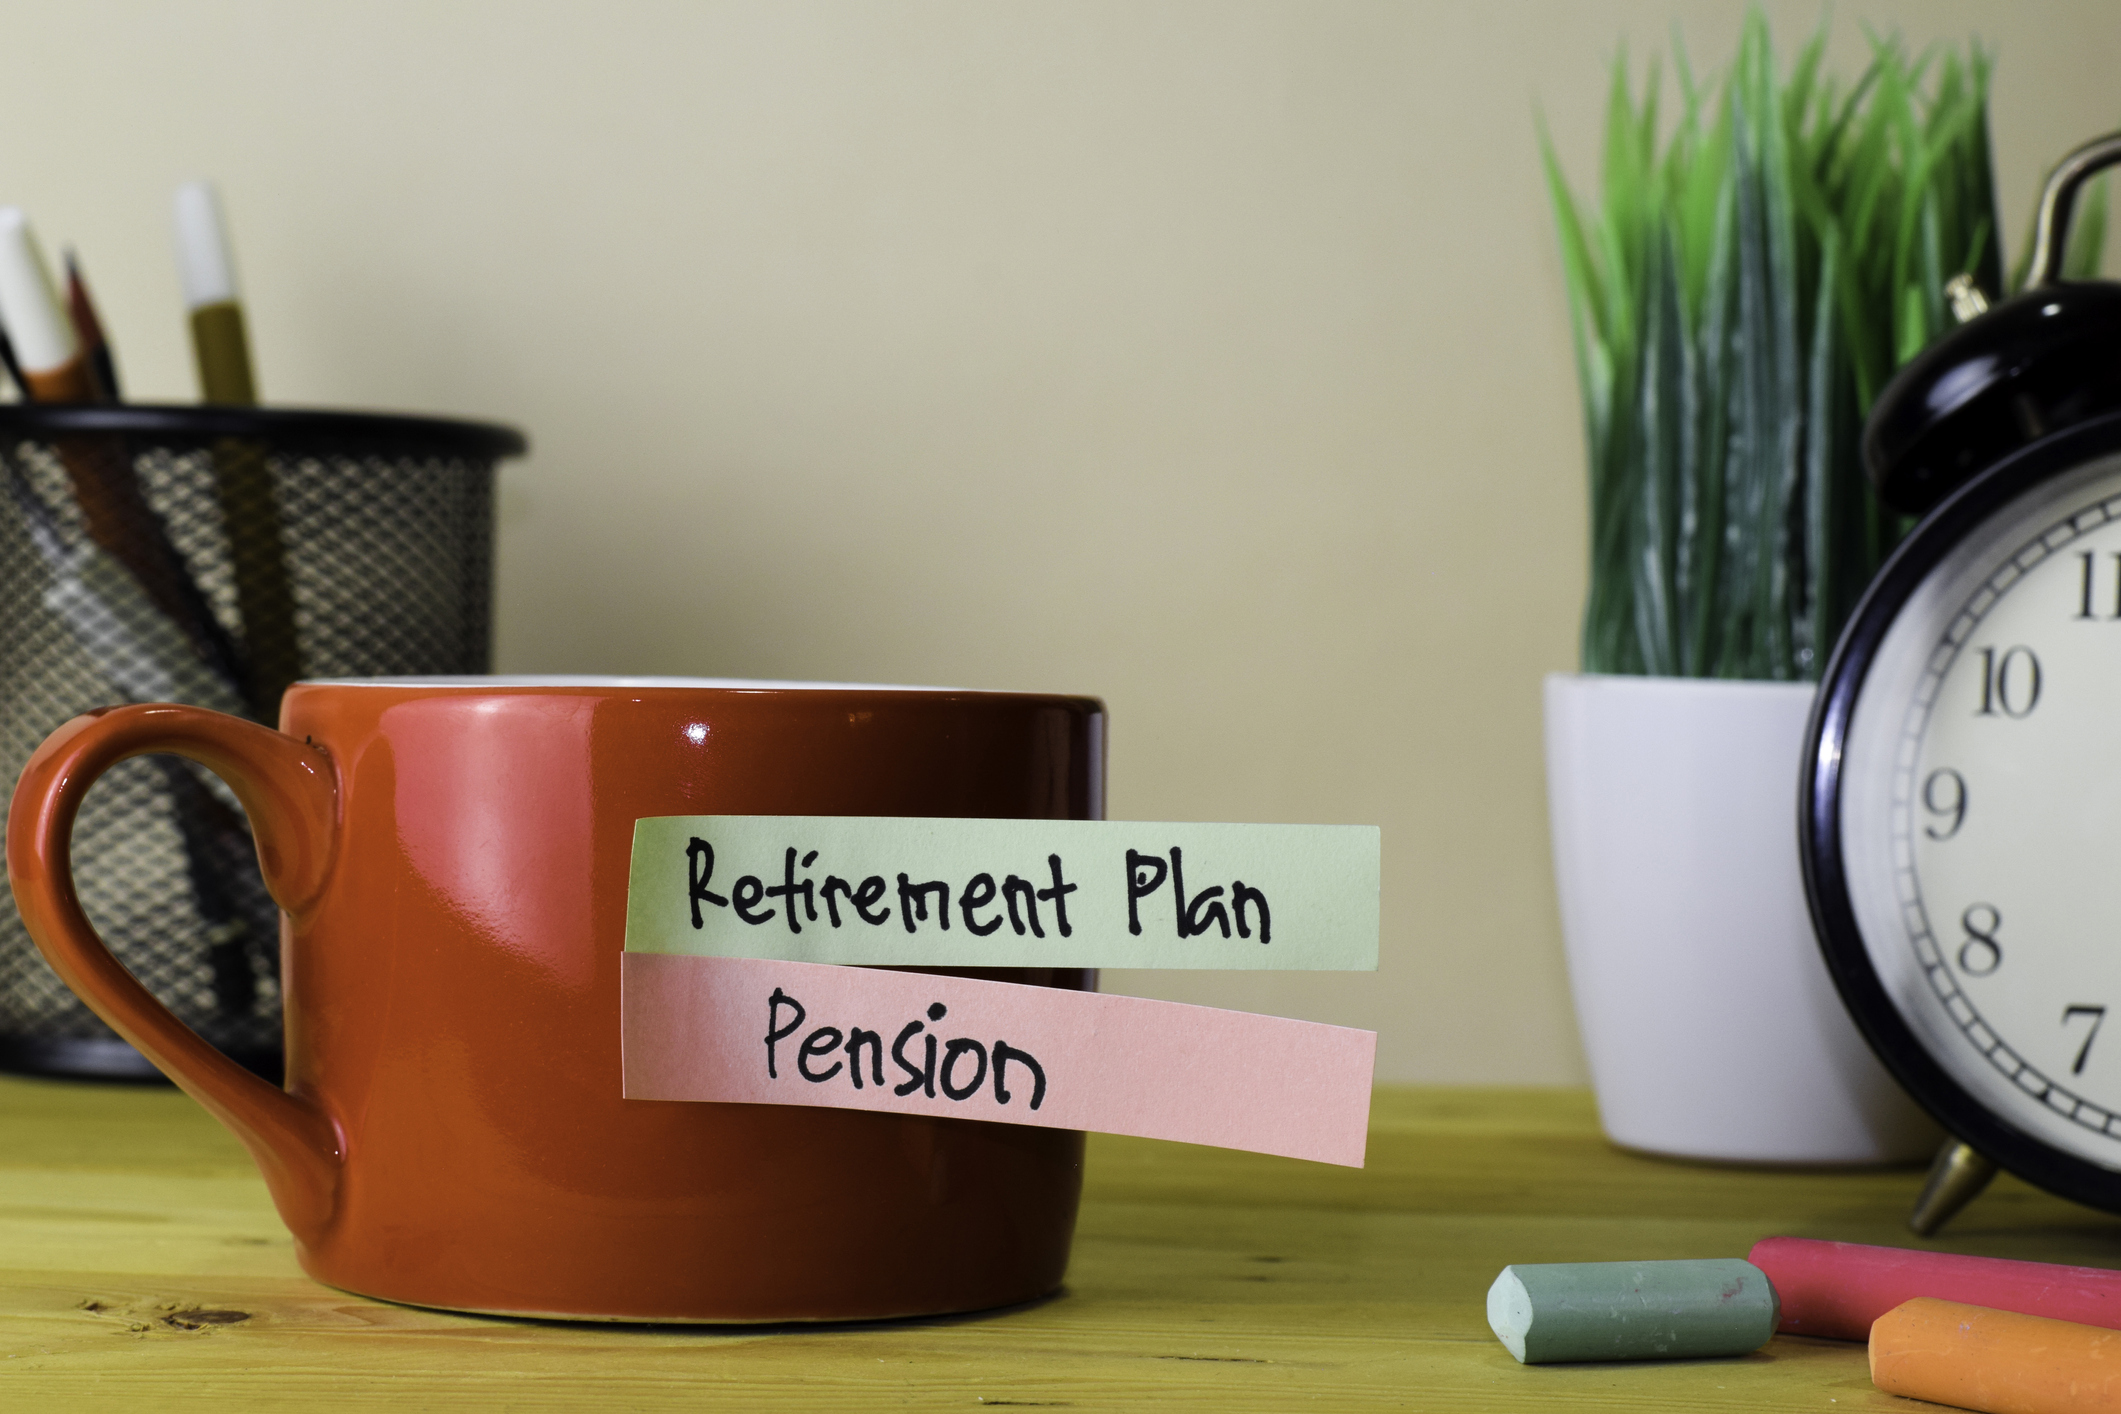 Where Did Pensions Go? Miles Financial Group